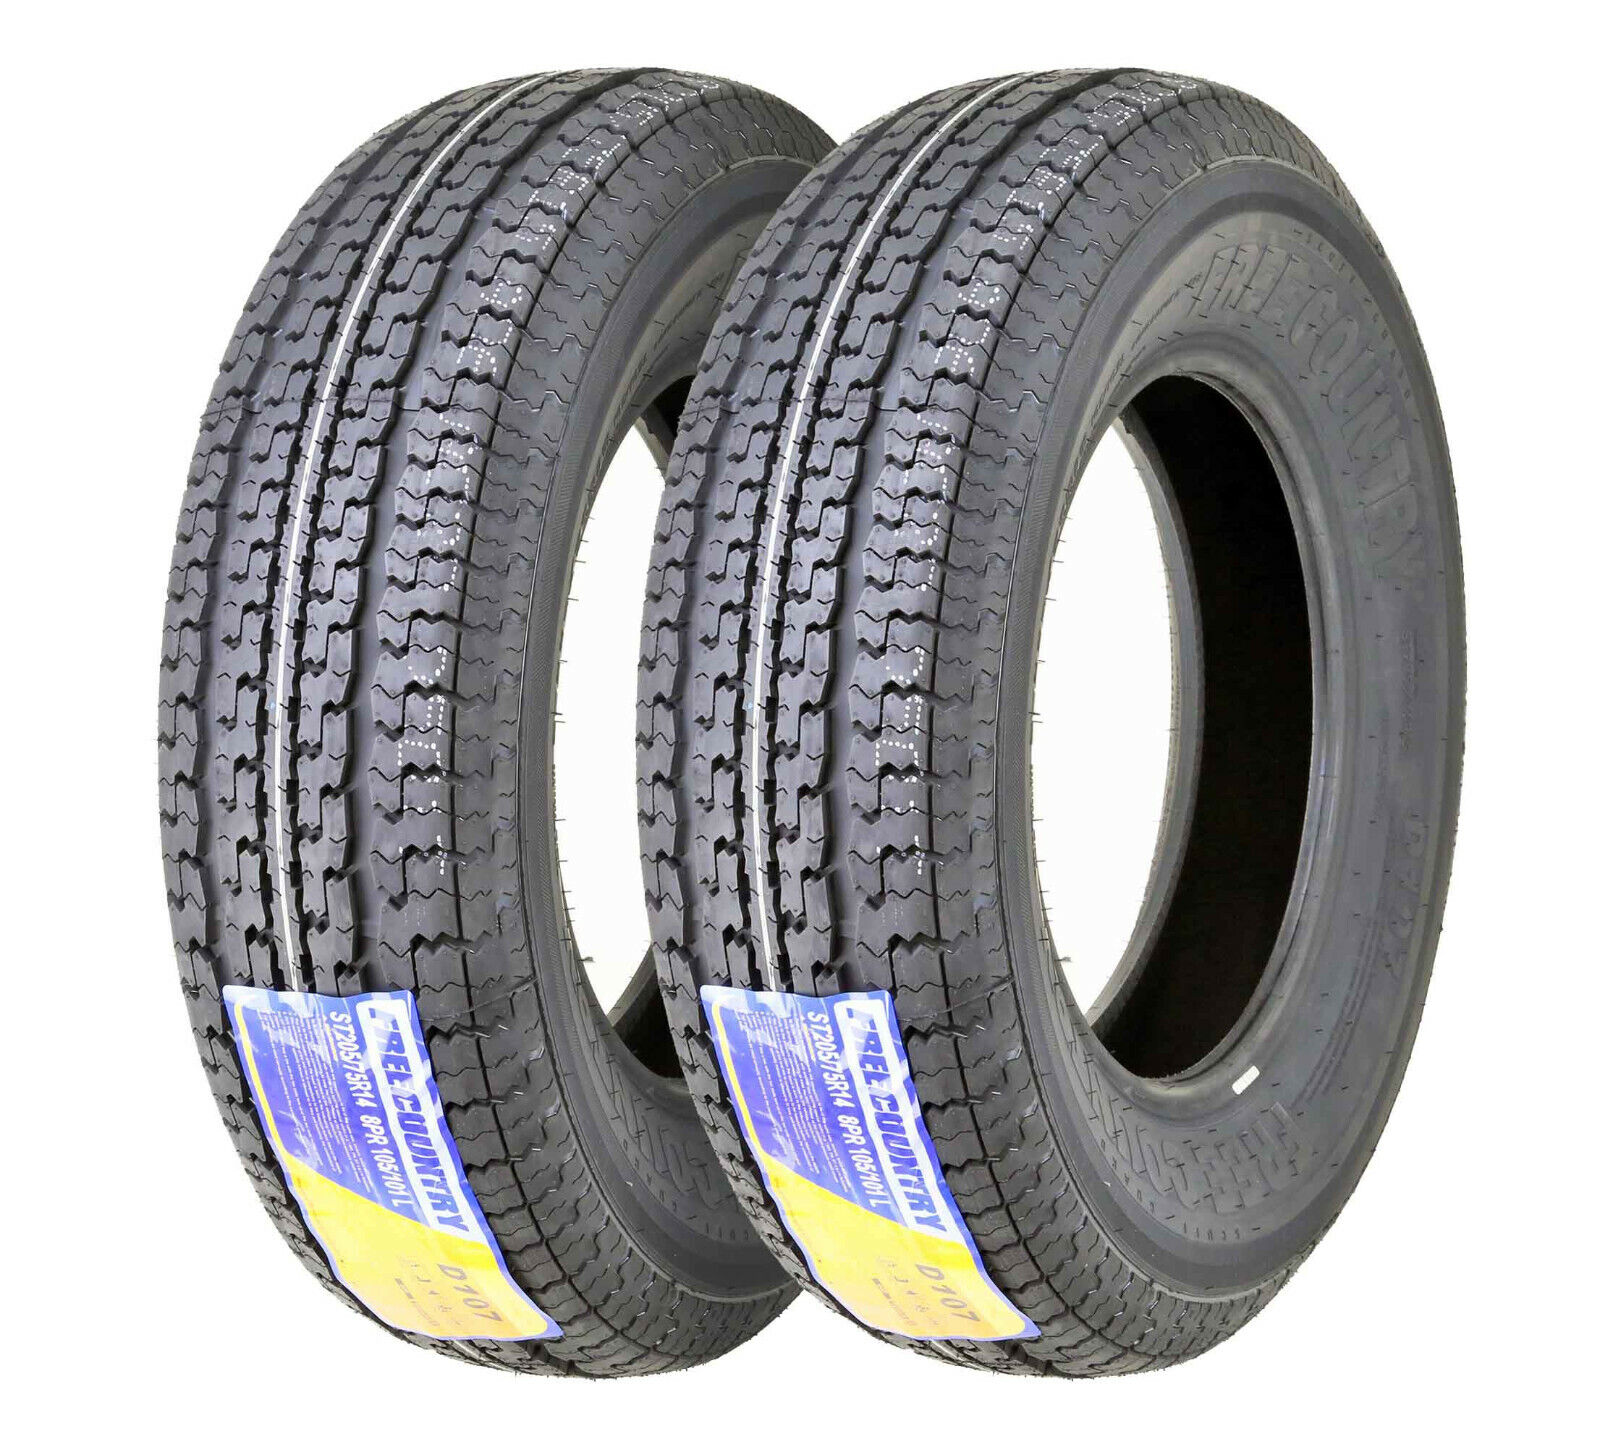 2 FREE COUNTRY ST205/75R14 Trailer Tires 205 75 14 8PR Scuff Guard Steel Belted